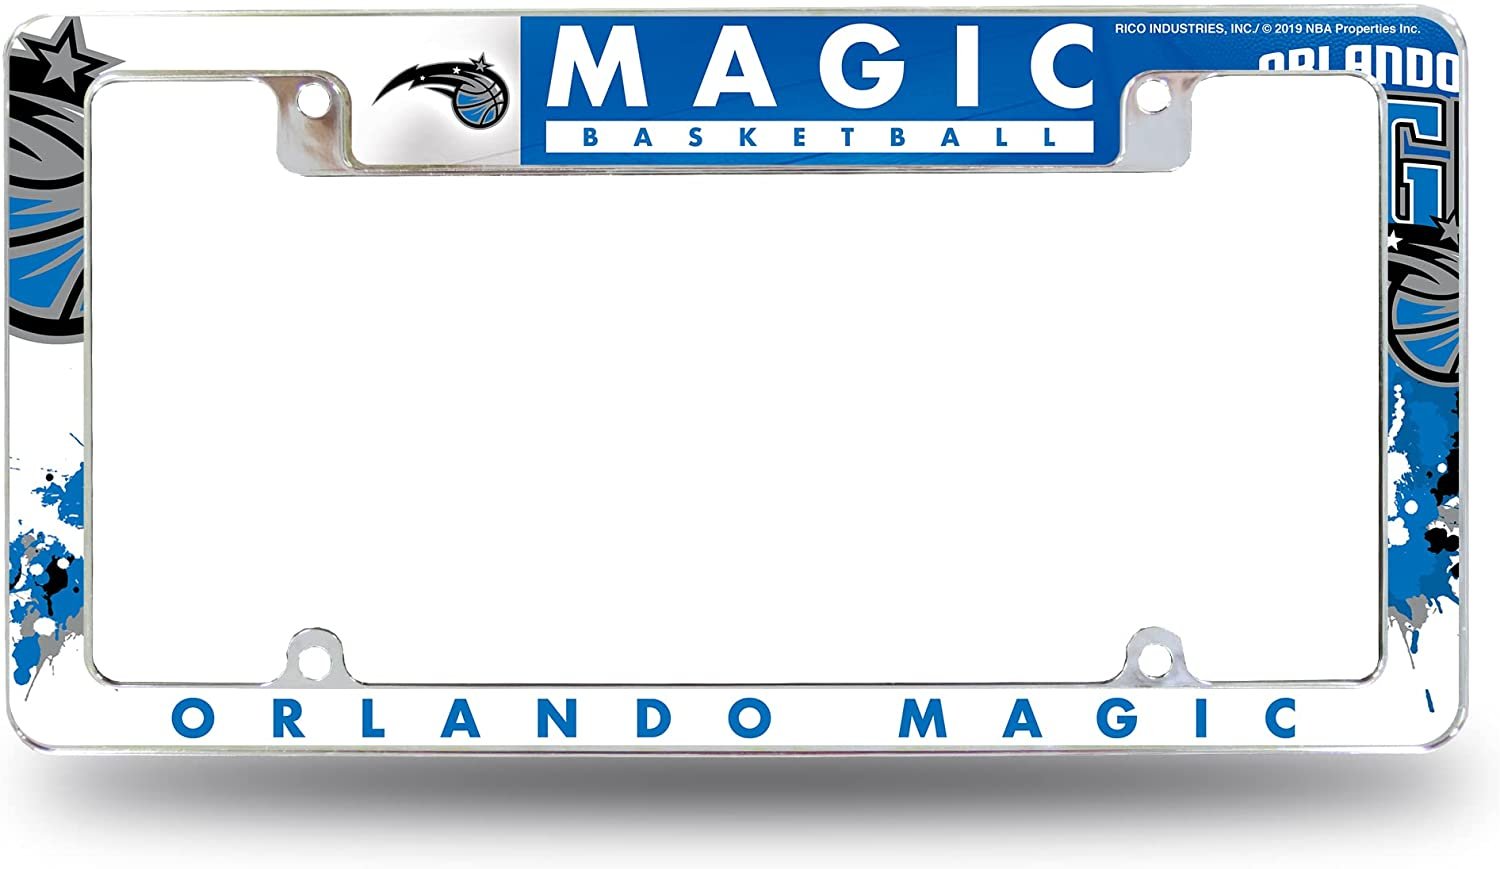 Orlando Magic Metal License Plate Frame Tag Cover All Over Design 12x6 Inch